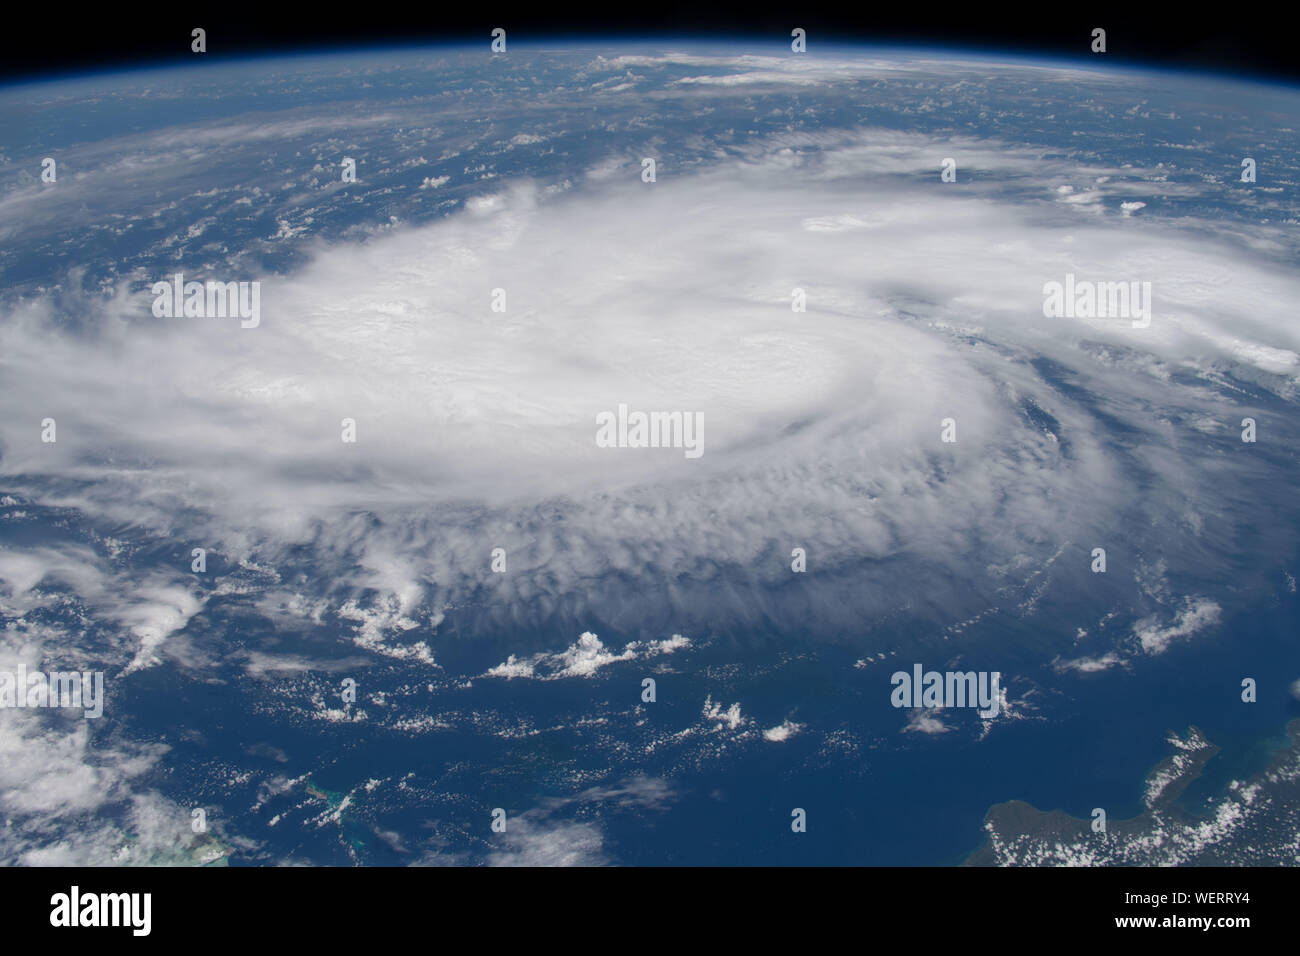 International Space Station, USA. 29 August 2019. The cyclonic clouds of Hurricane Dorian seen from the International Space Station as it churns through the Caribbean August 29, 2019 in the Atlantic Ocean. The current forecast calls for Dorian to strengthen over open water to a Category 4 with winds of 140 mph before making landfall in South Florida late Monday.  Credit: NASA/Planetpix/Alamy Live News Stock Photo